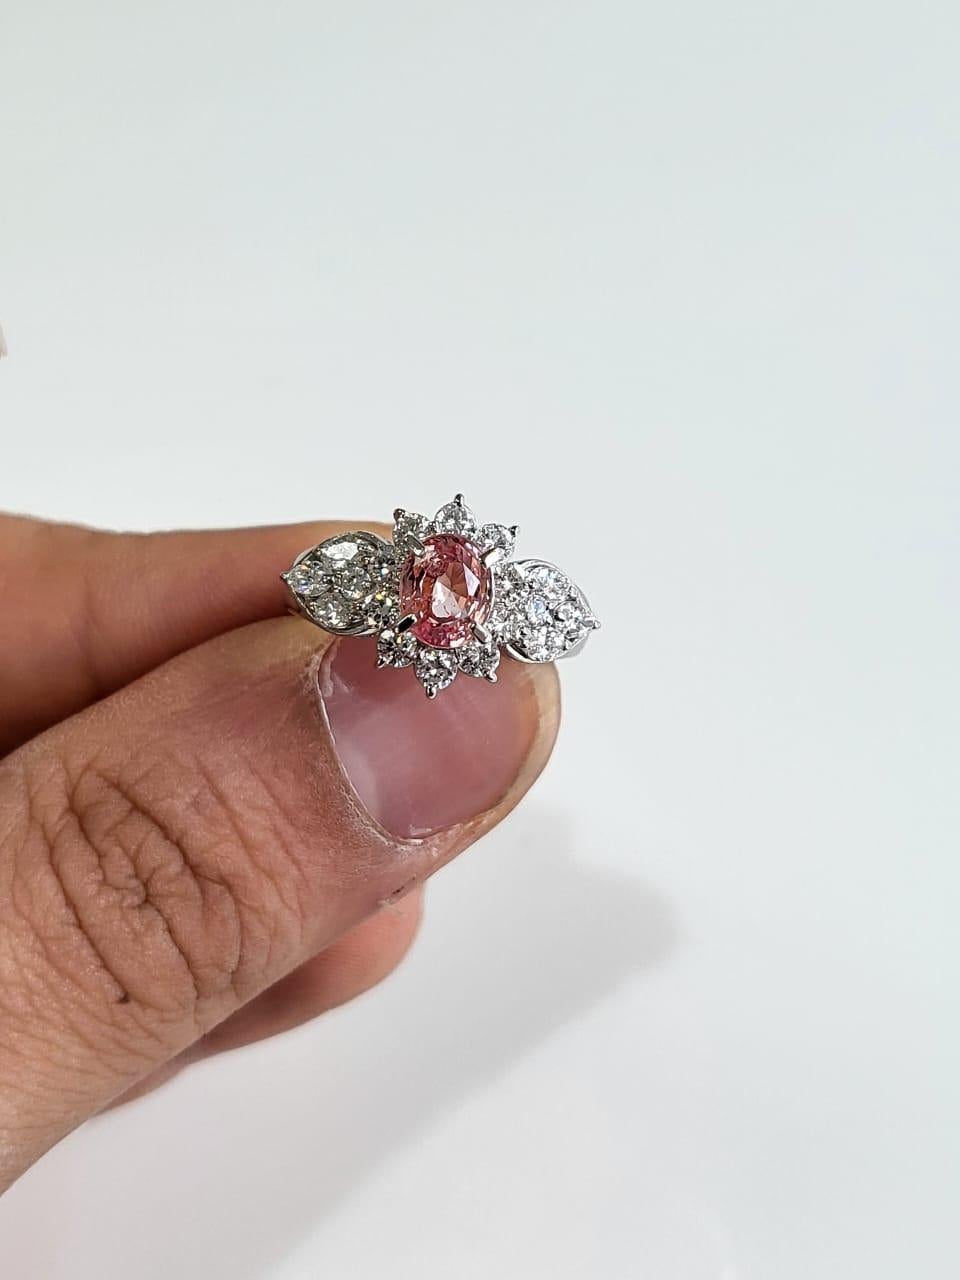 A very gorgeous and one of a kind, Padparadscha Sapphire Engagement Ring set in PT900 & Diamonds. The weight of the Padparadscha Sapphire is 1.74 carats. The Padparadscha Sapphire is completely natural, without any treatment and is of Ceylon (Sri